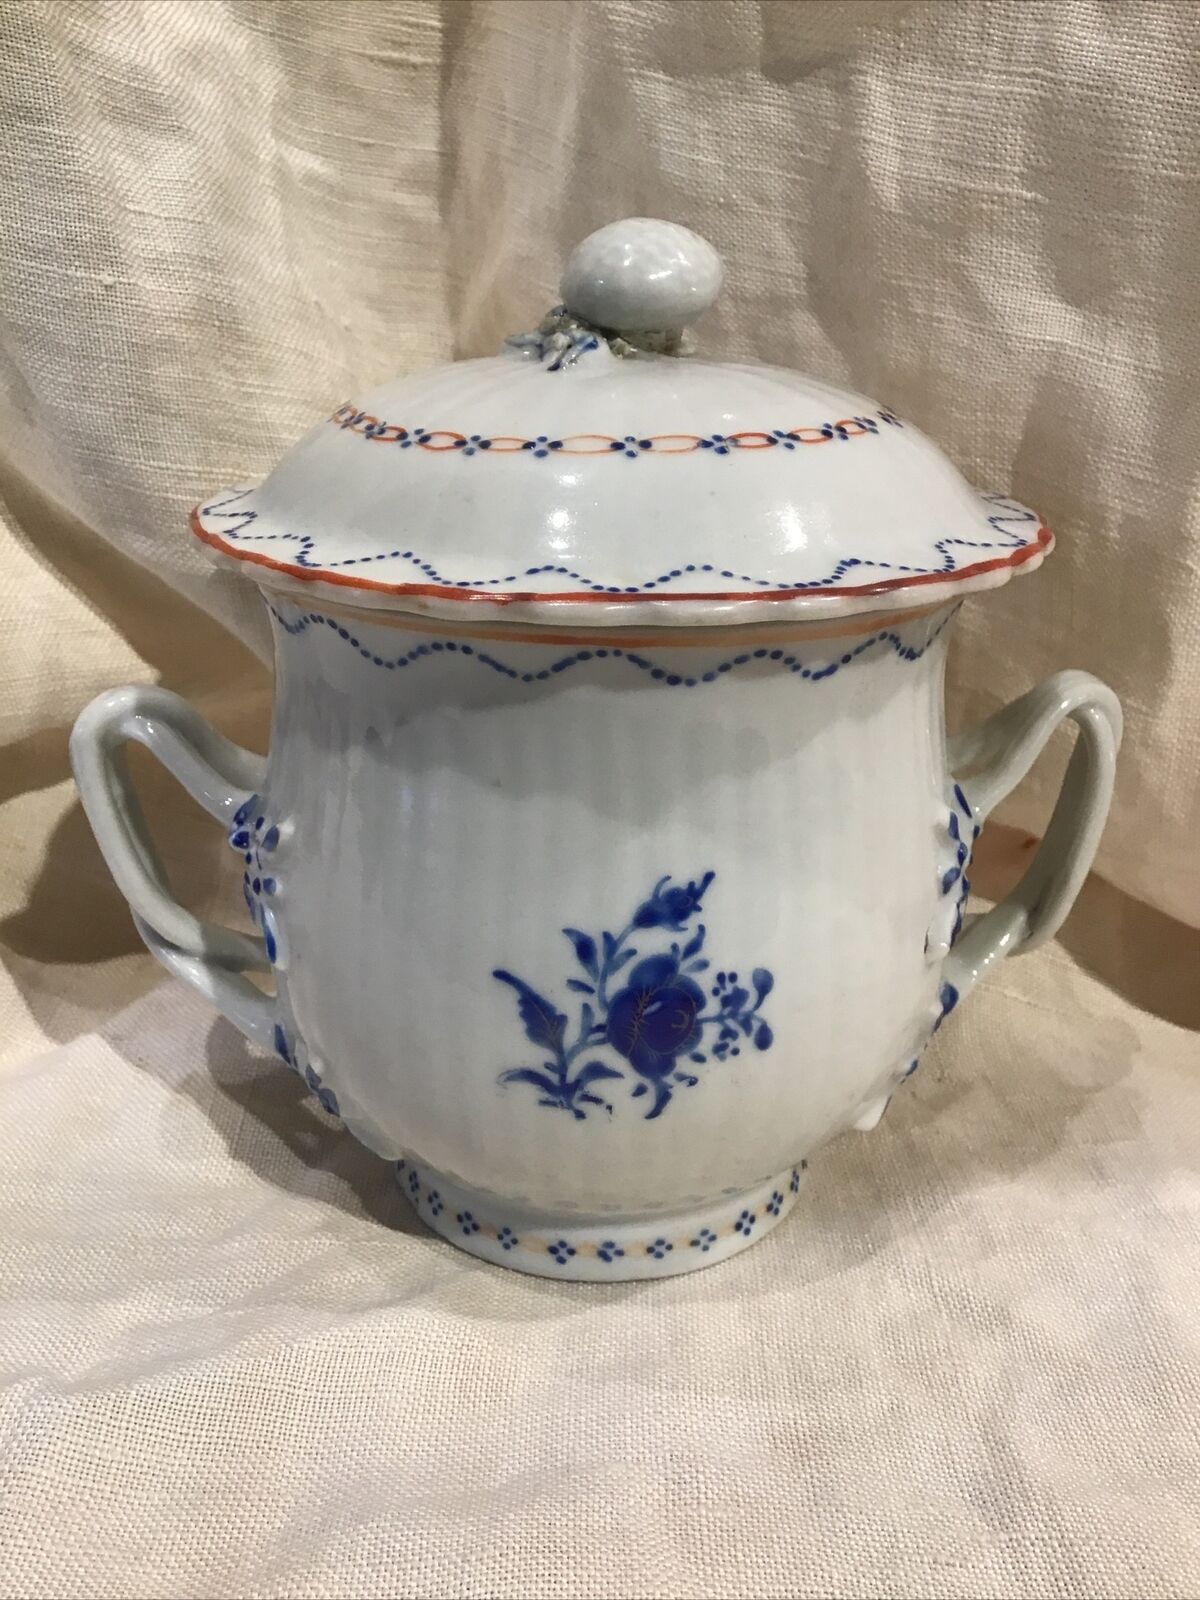 EARLY 19TH CENTURY CHINA EXPORT PORCELAIN COVERED SUGAR BOWL TWI